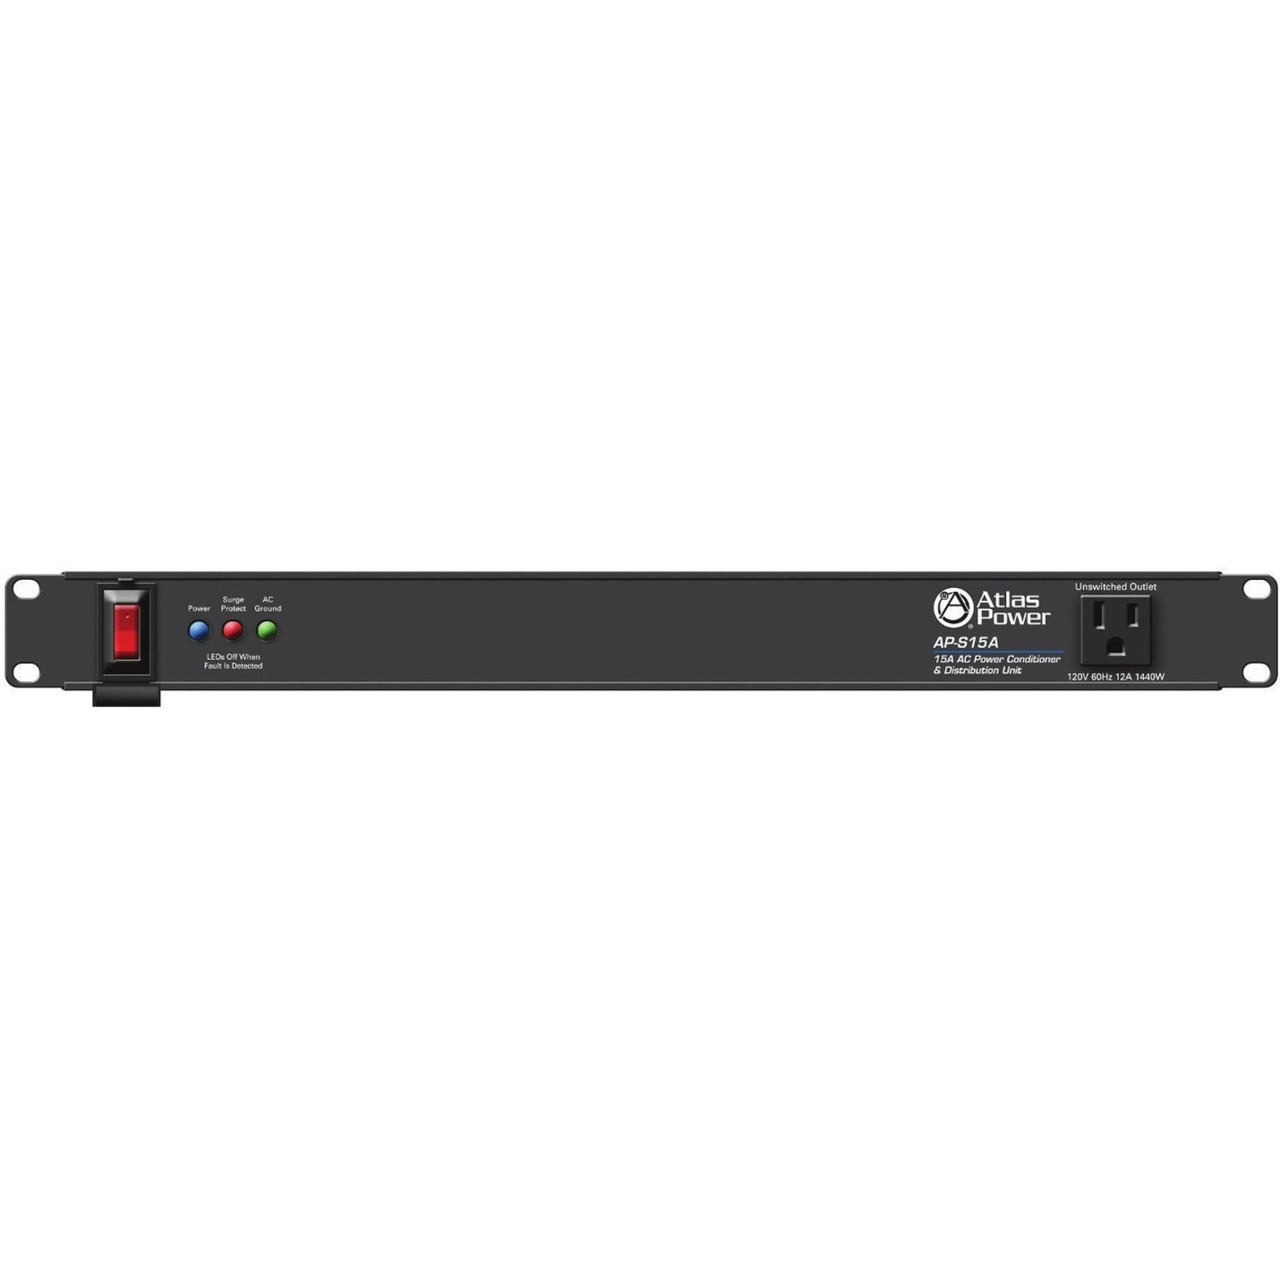 AtlasIED 15A Power Conditioner and Distribution Unit with IEC Power Cord - AP-S15A